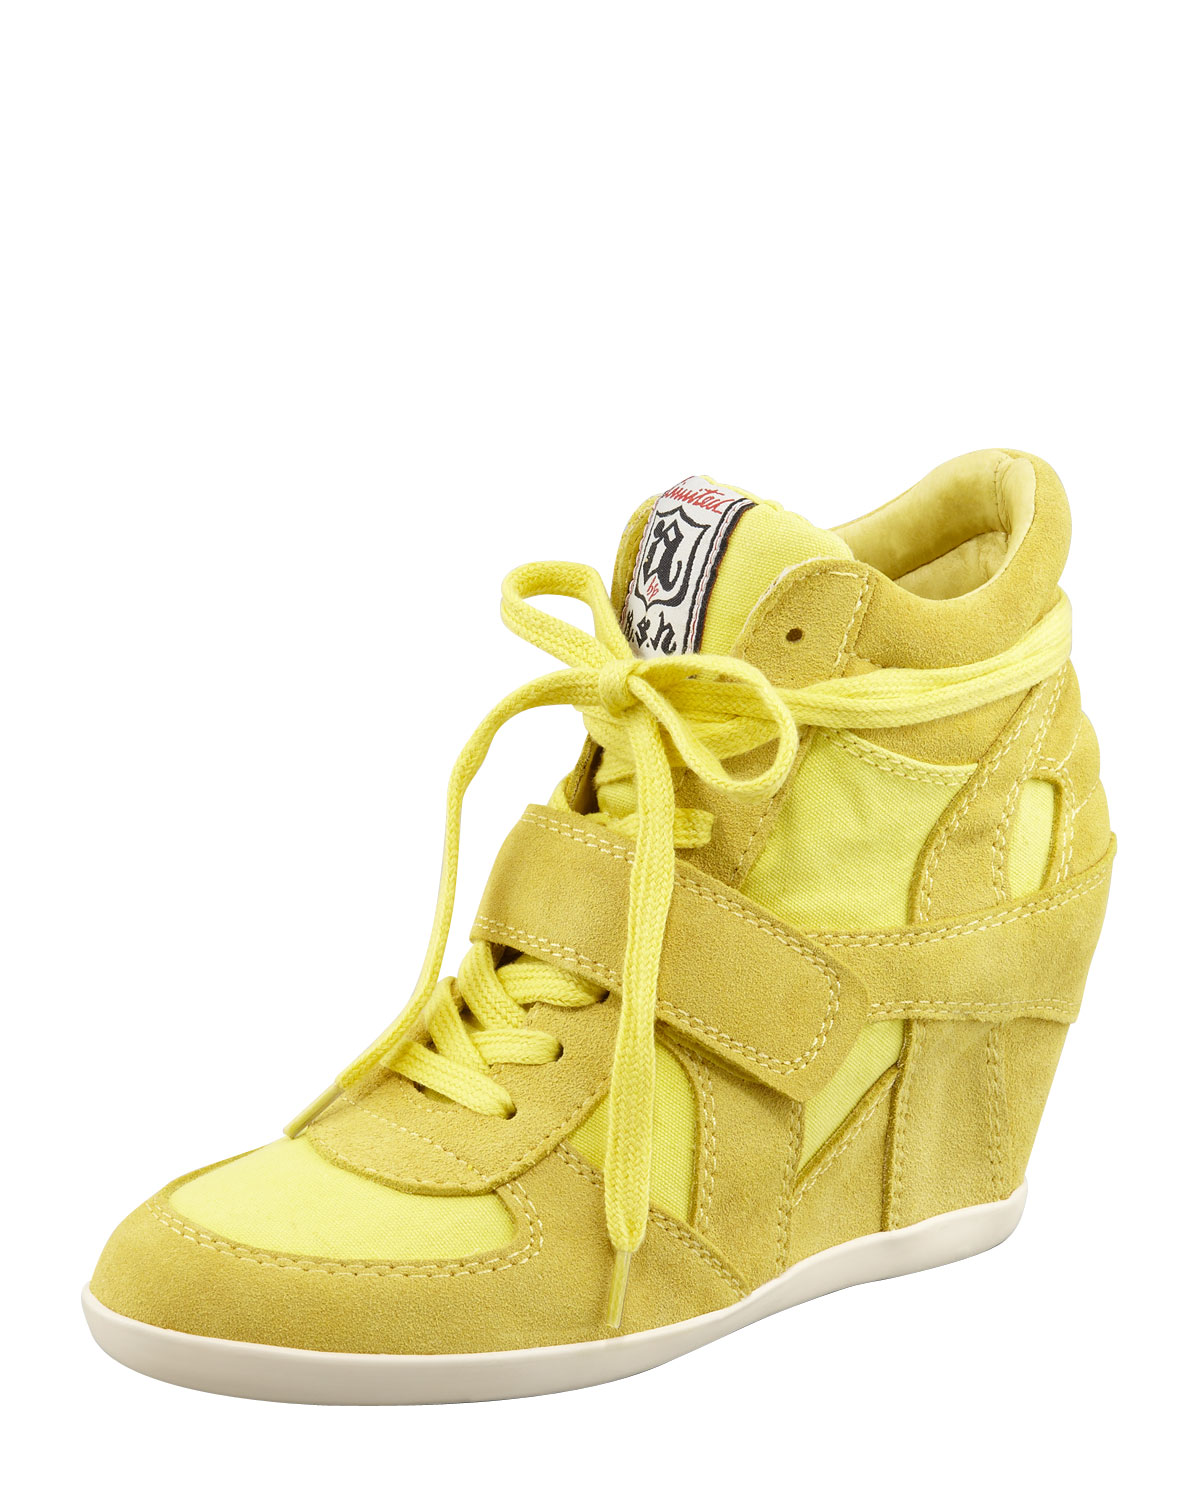 Ash Bowie Hightop Wedge Sneaker Bright Yellow - Lyst